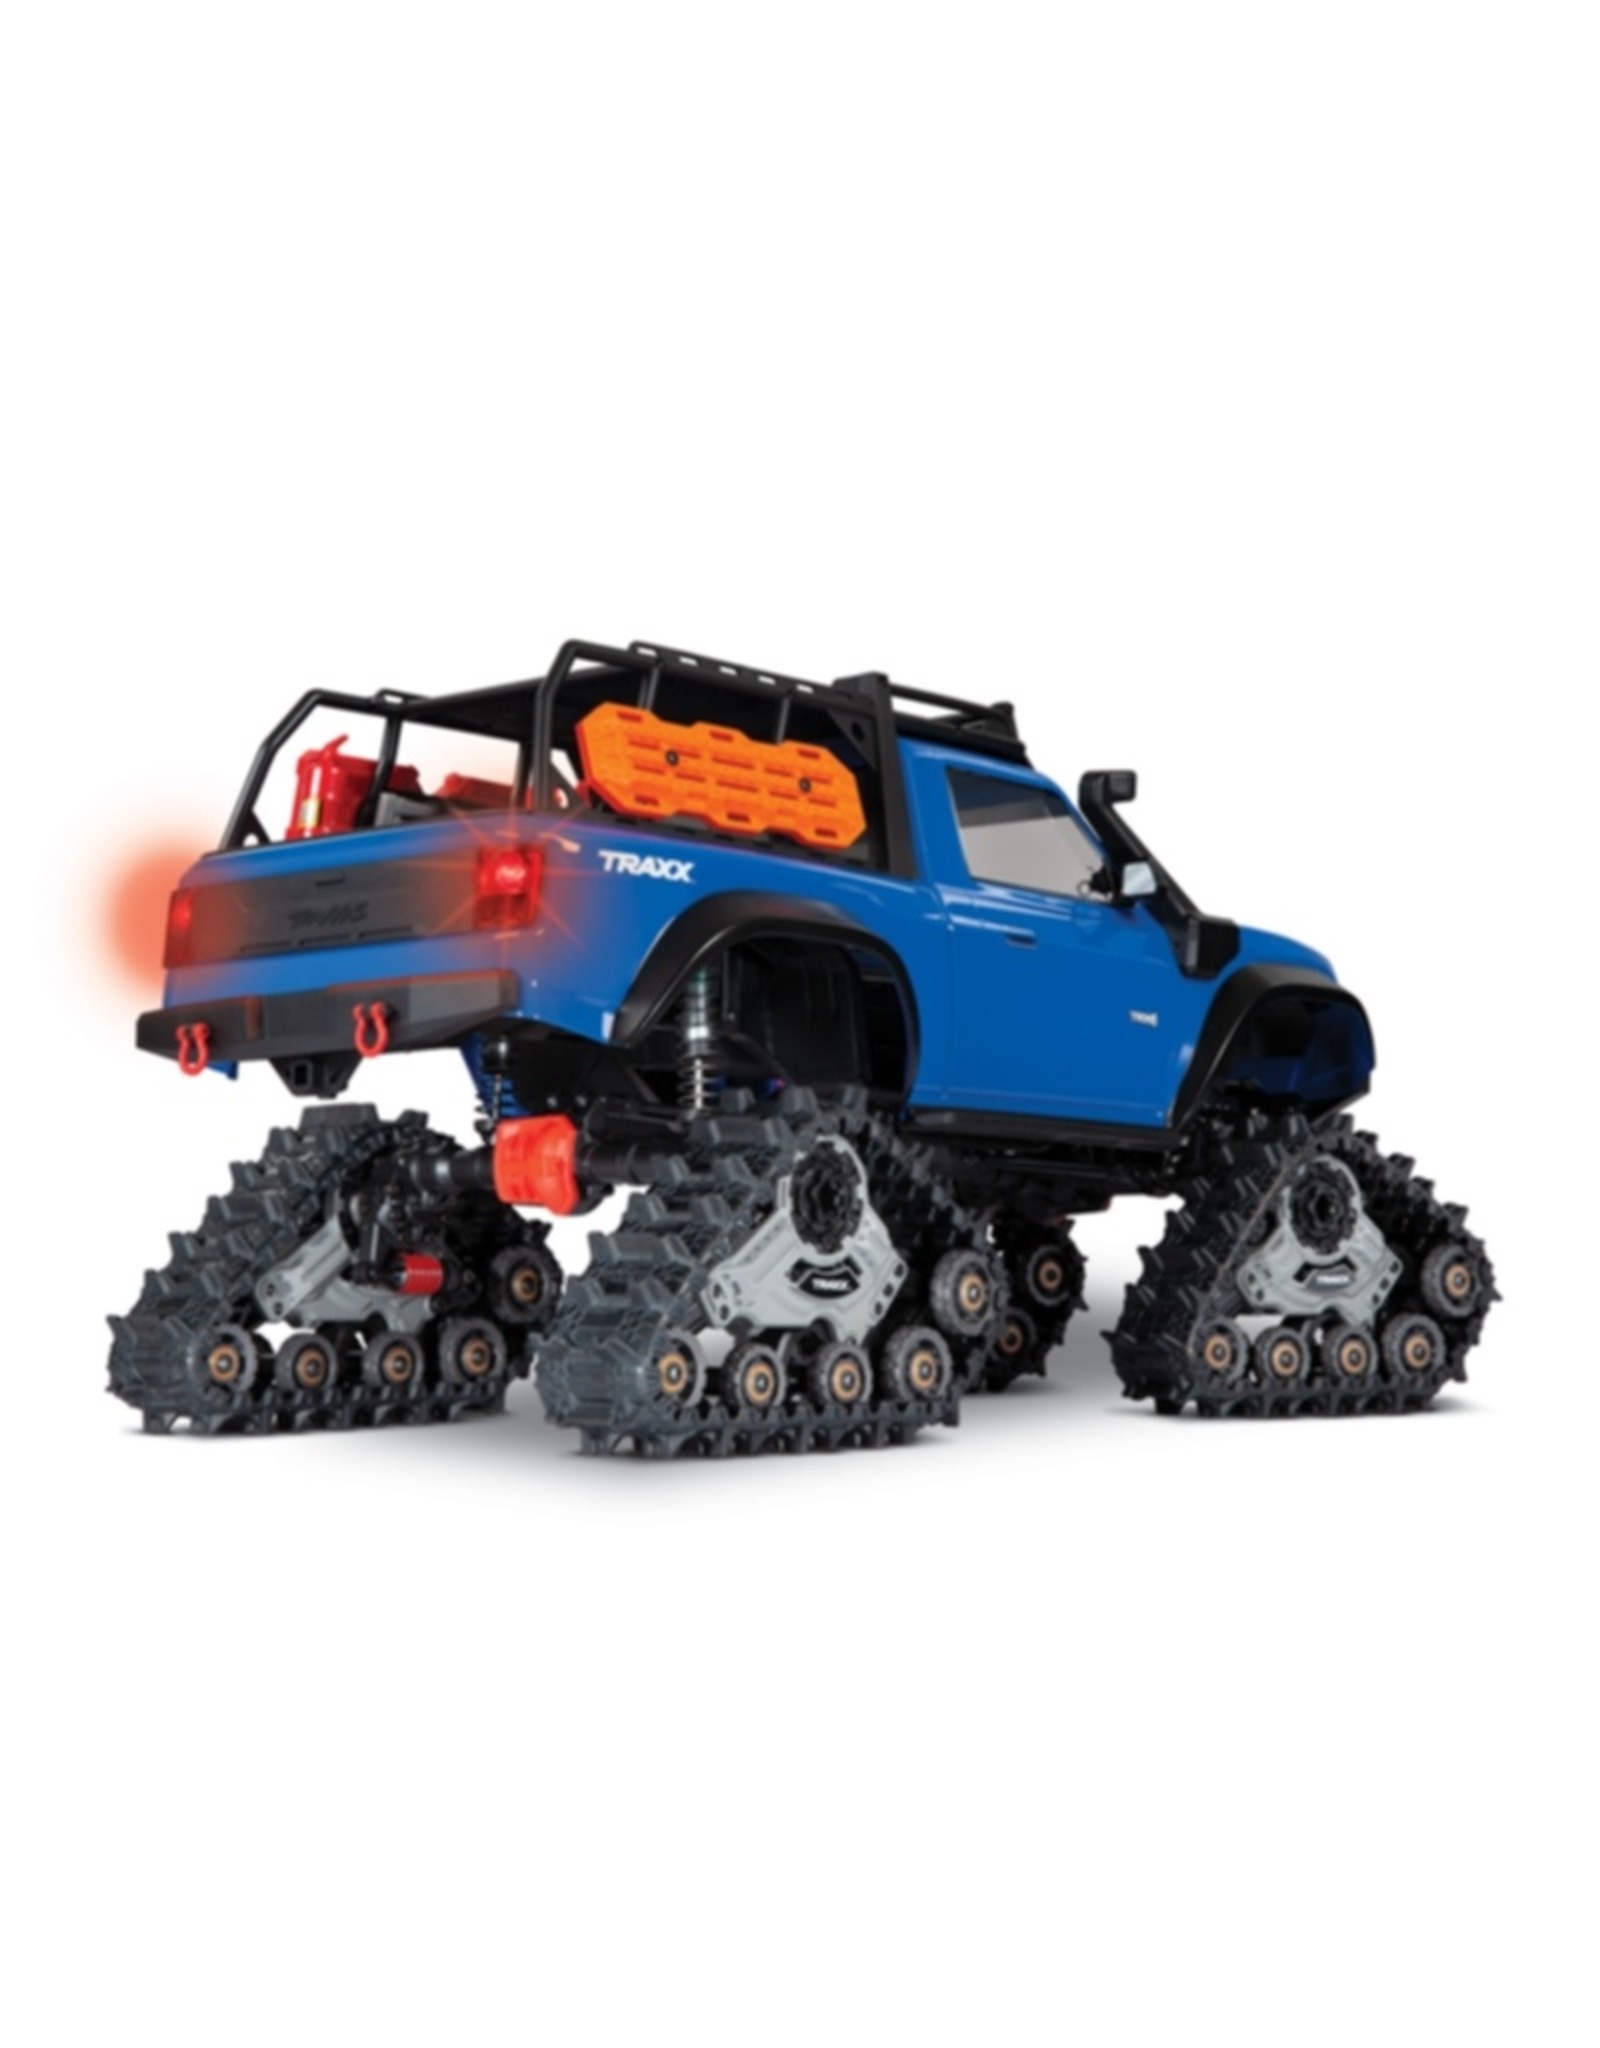 Traxxas TRA82034-4 Blue - TRX-4® with All-Terrain Traxx™: 1/10 Scale 4WD Electric Truck. Ready-to-Race® with TQ 2.4GHz Radio System, XL-5 HV ESC (fwd/rev), and Titan® 550 motor.